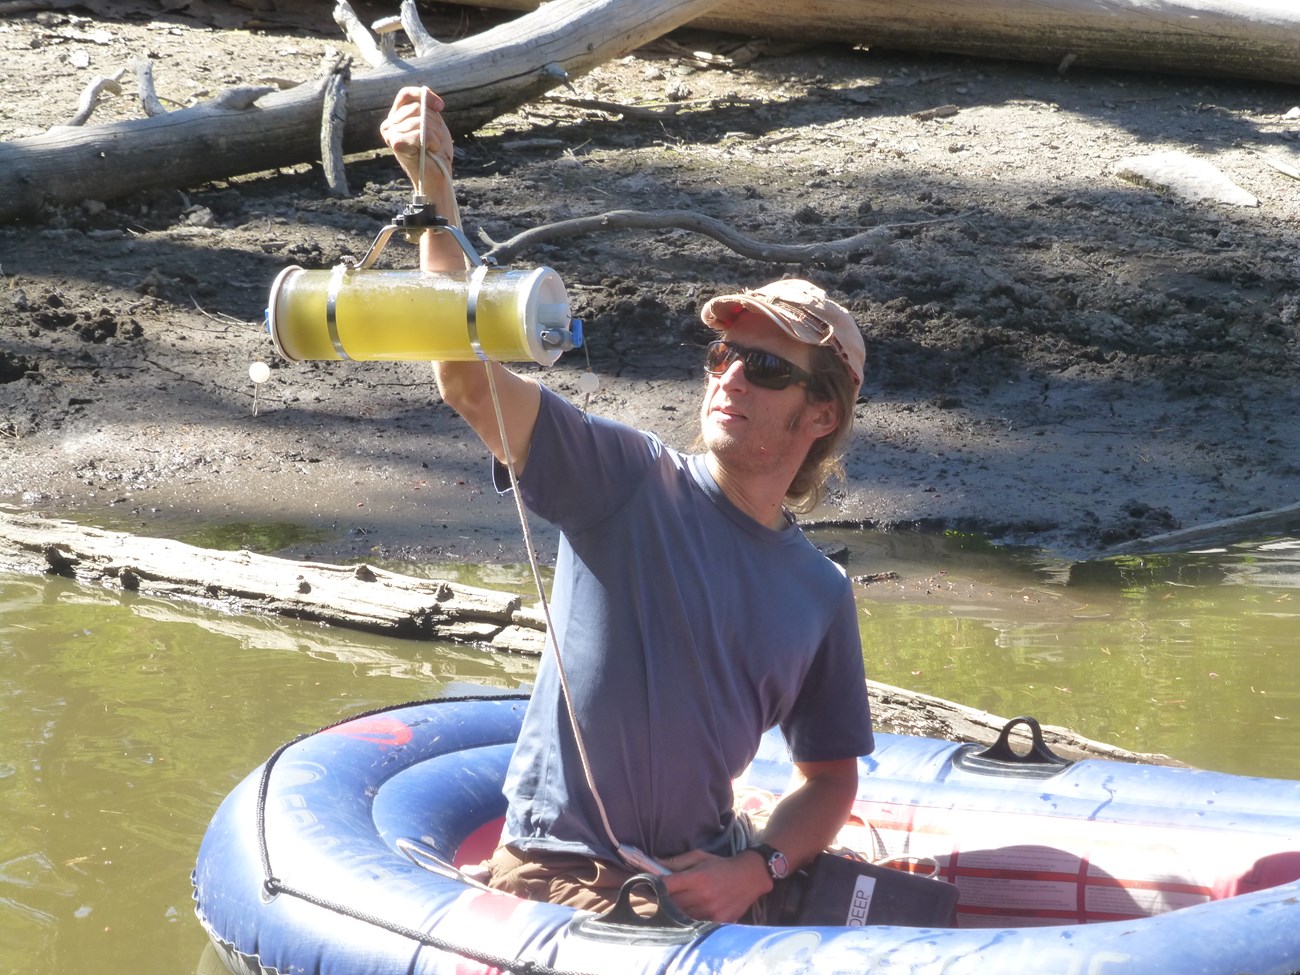 Technician in a raft on a shallow lake holding up a container of murky lake water.